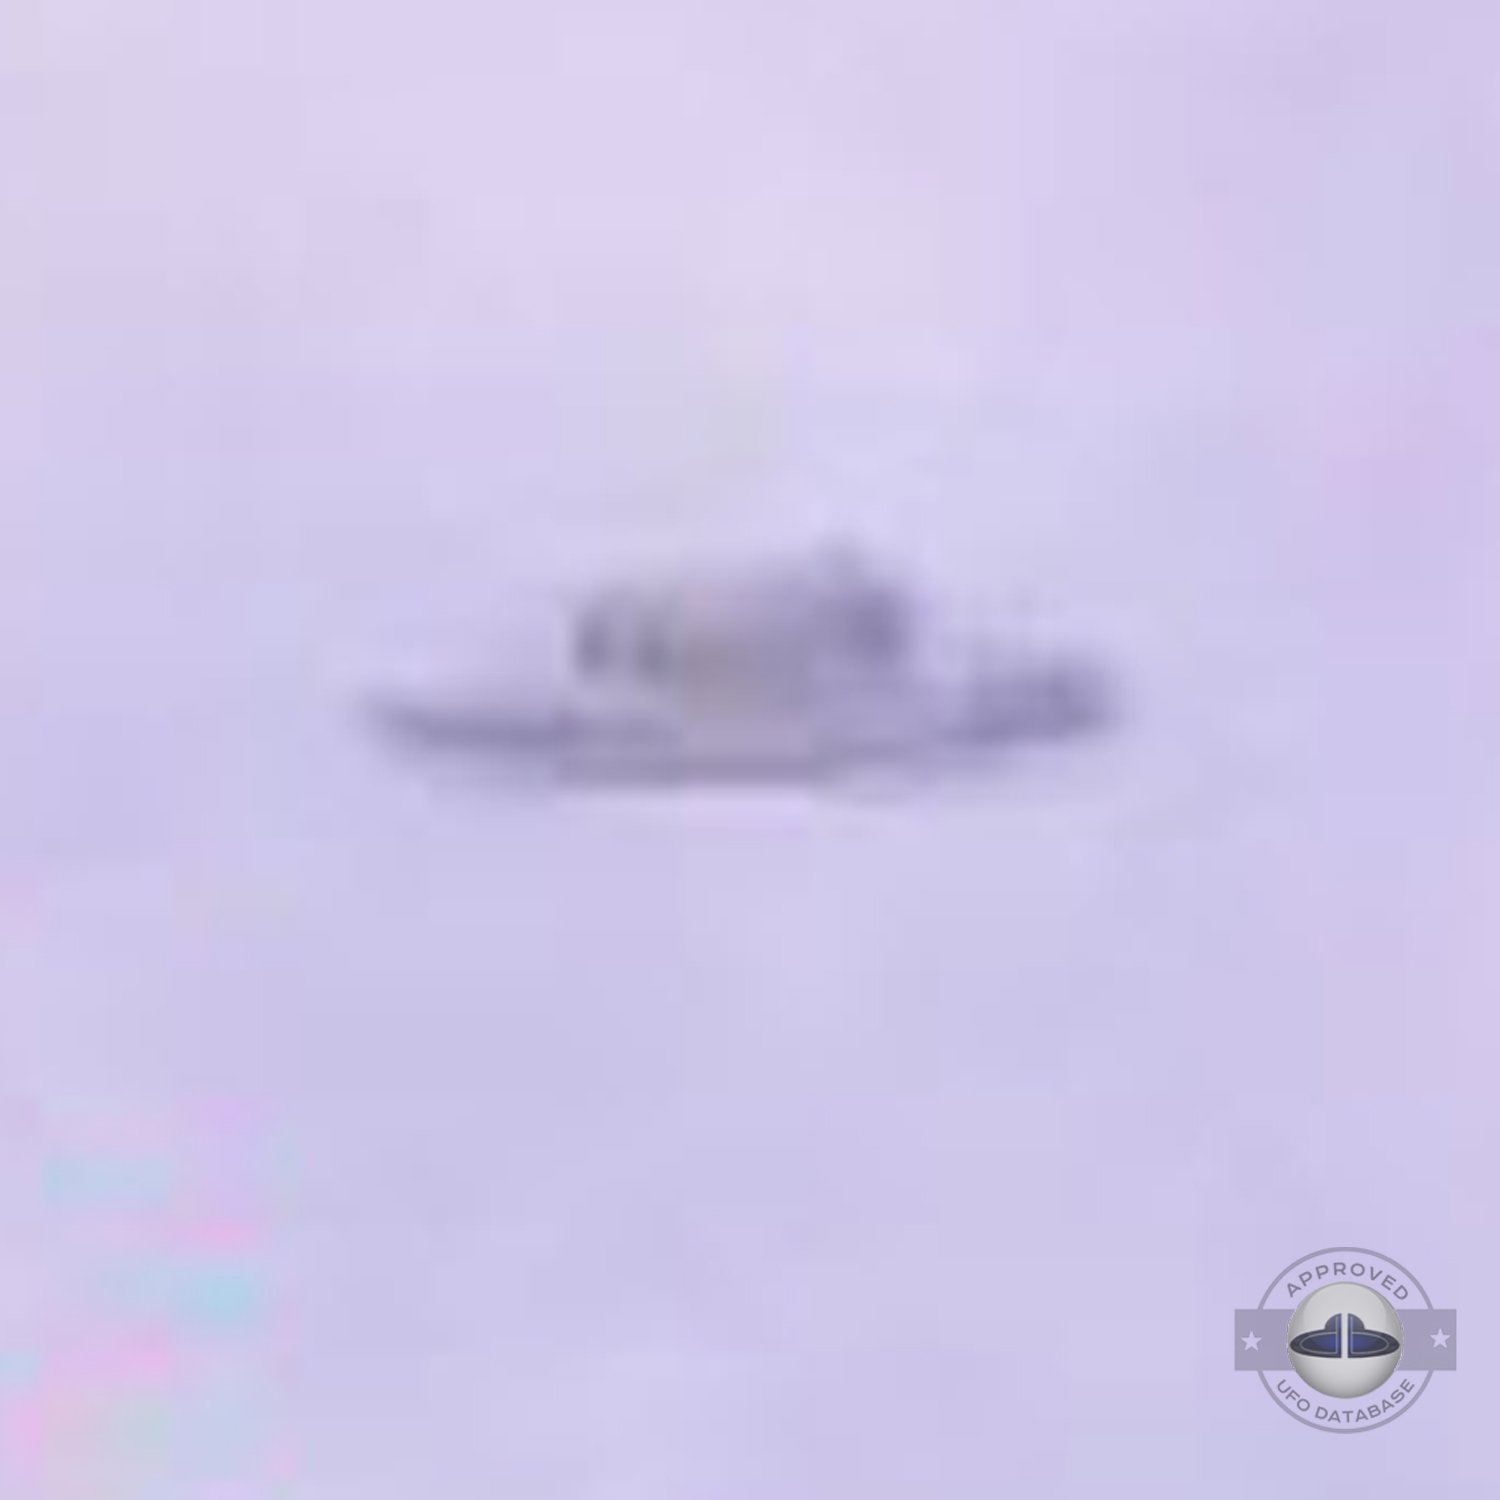 Hat Shaped UFO captured on picture in Shillong | India | August 2009 UFO Picture #224-4